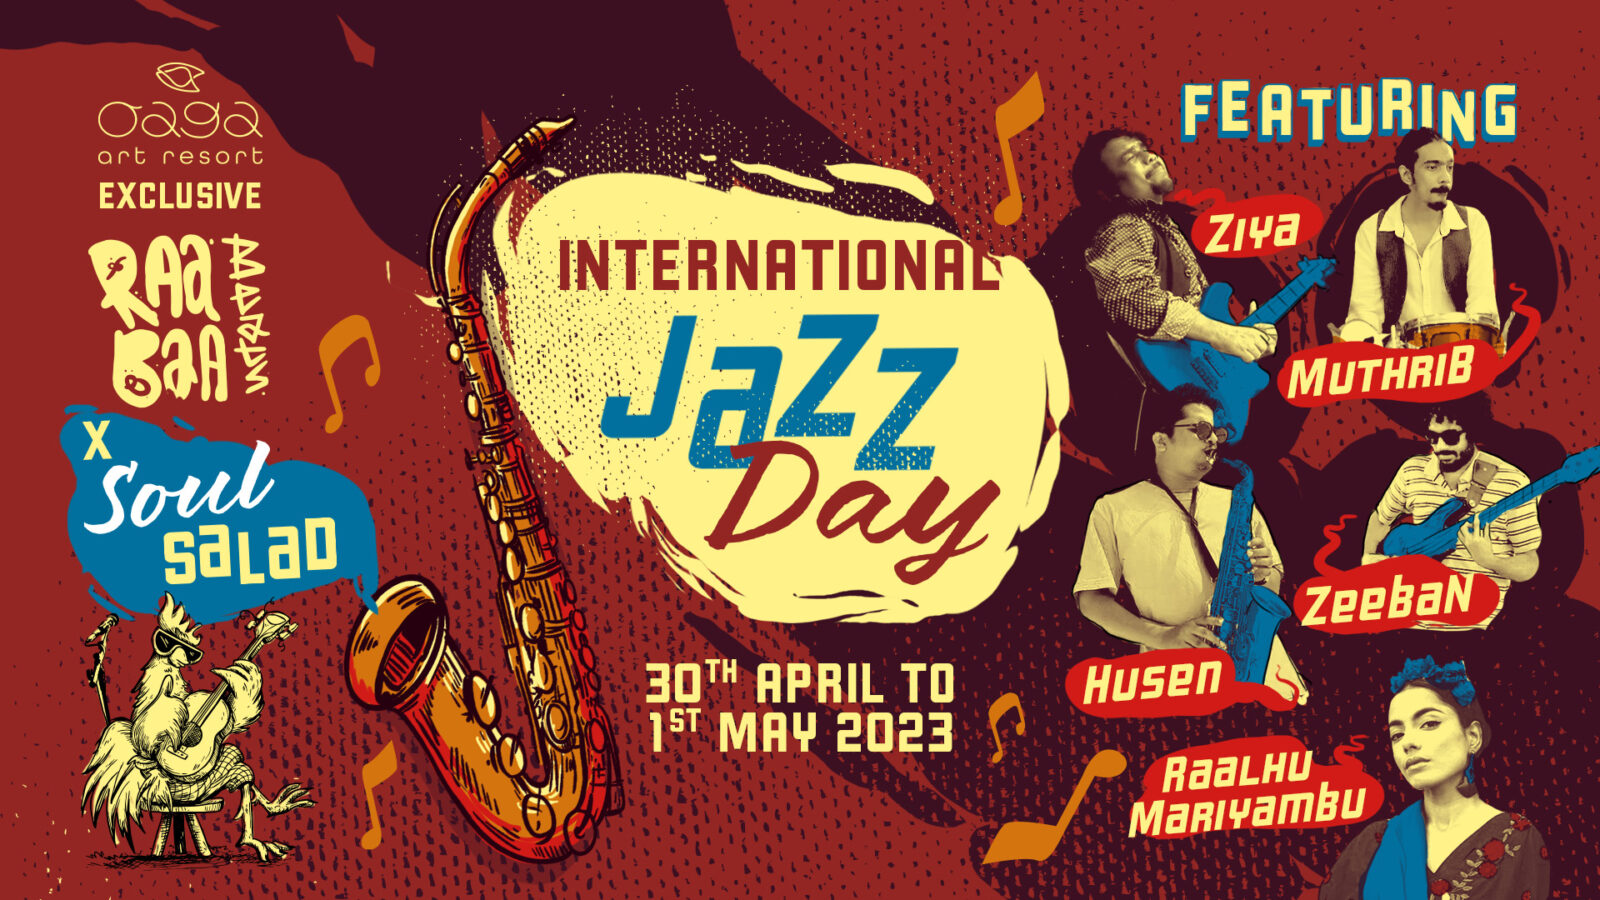 Celebrate International Jazz Day at Oaga Art Resort with the Soul Salad Band Line-up